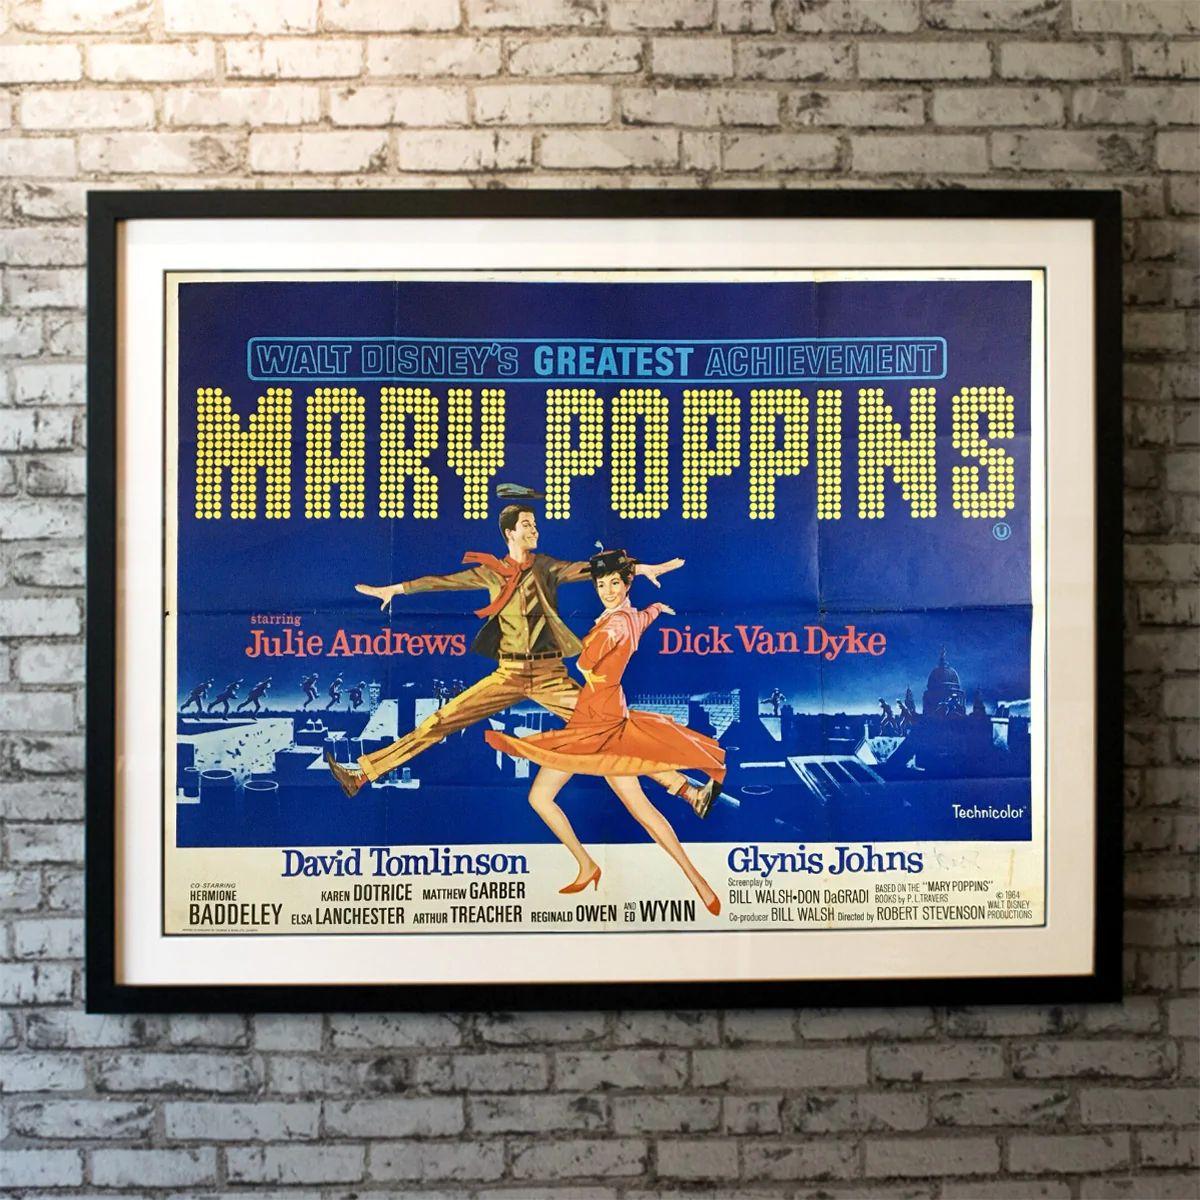 Mary Poppins, Unframed Poster, 1964

In turn of the century London, a magical nanny employs music and adventure to help two neglected children become closer to their father.

Year: 1964
Nationality: United Kingdom
Condition: Folded
Type: Original